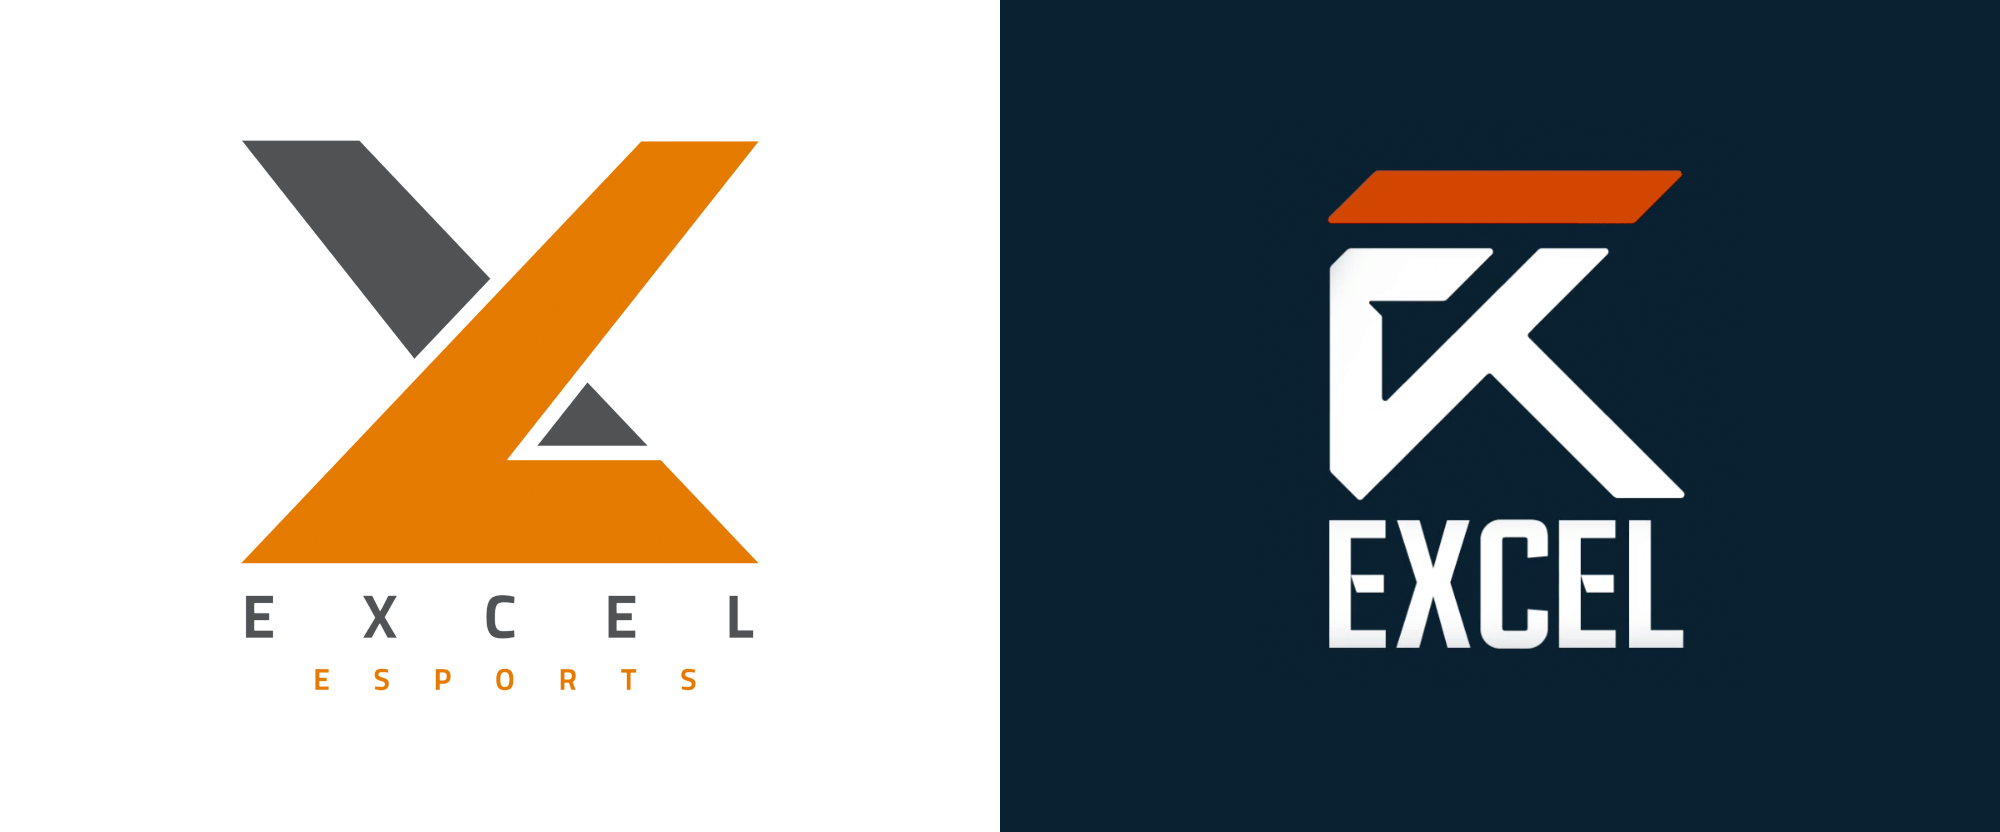 New Excel Logo - Brand New: New Logo and Identity for exceL Esports by LoveGunn